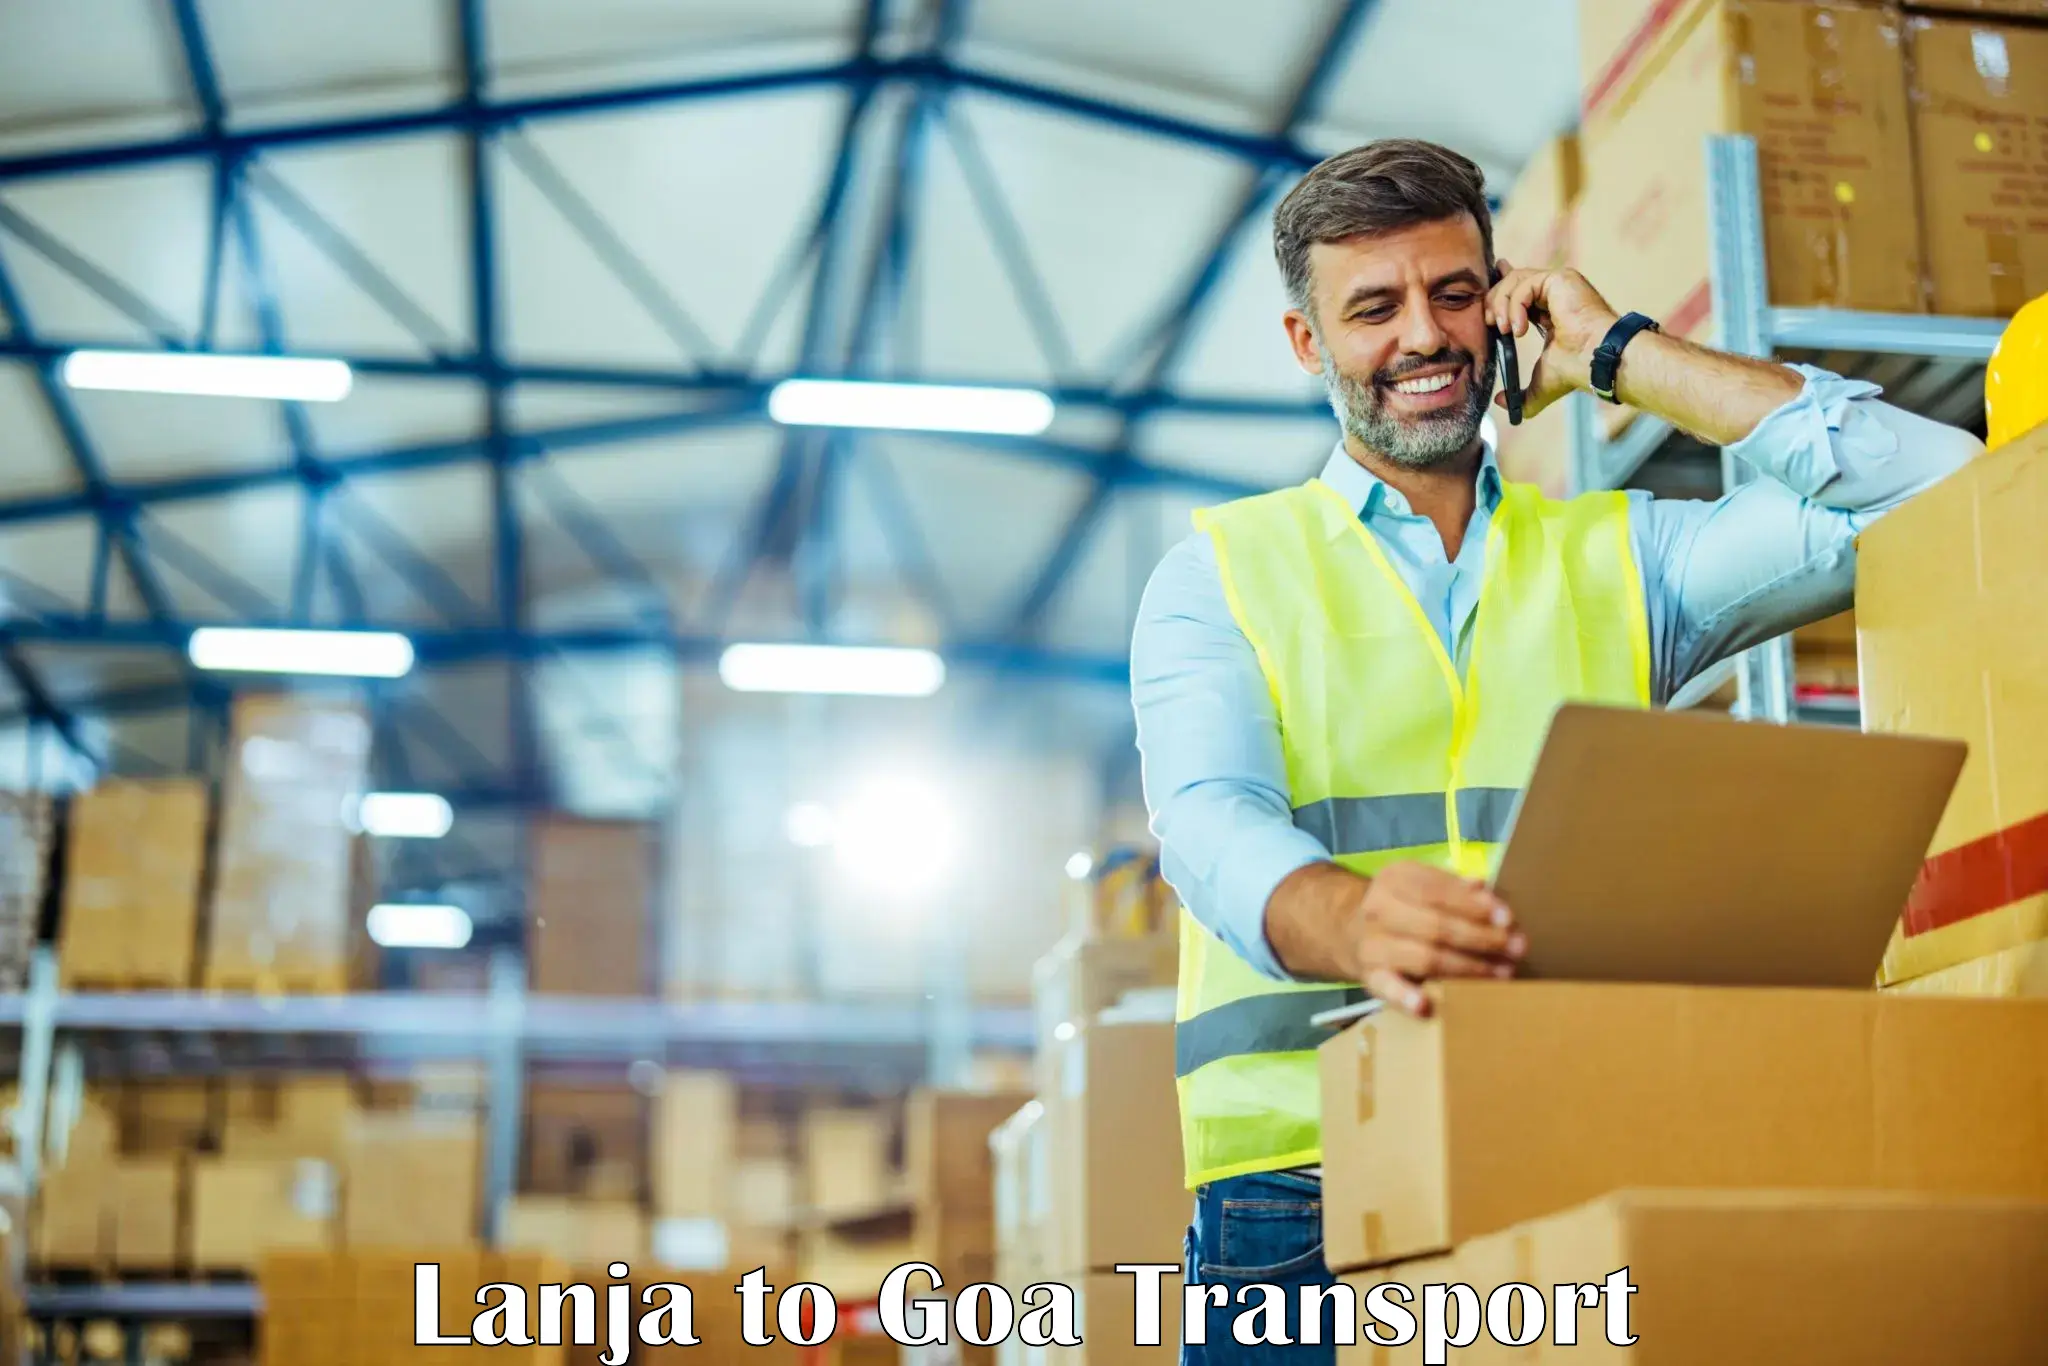 Delivery service Lanja to Goa